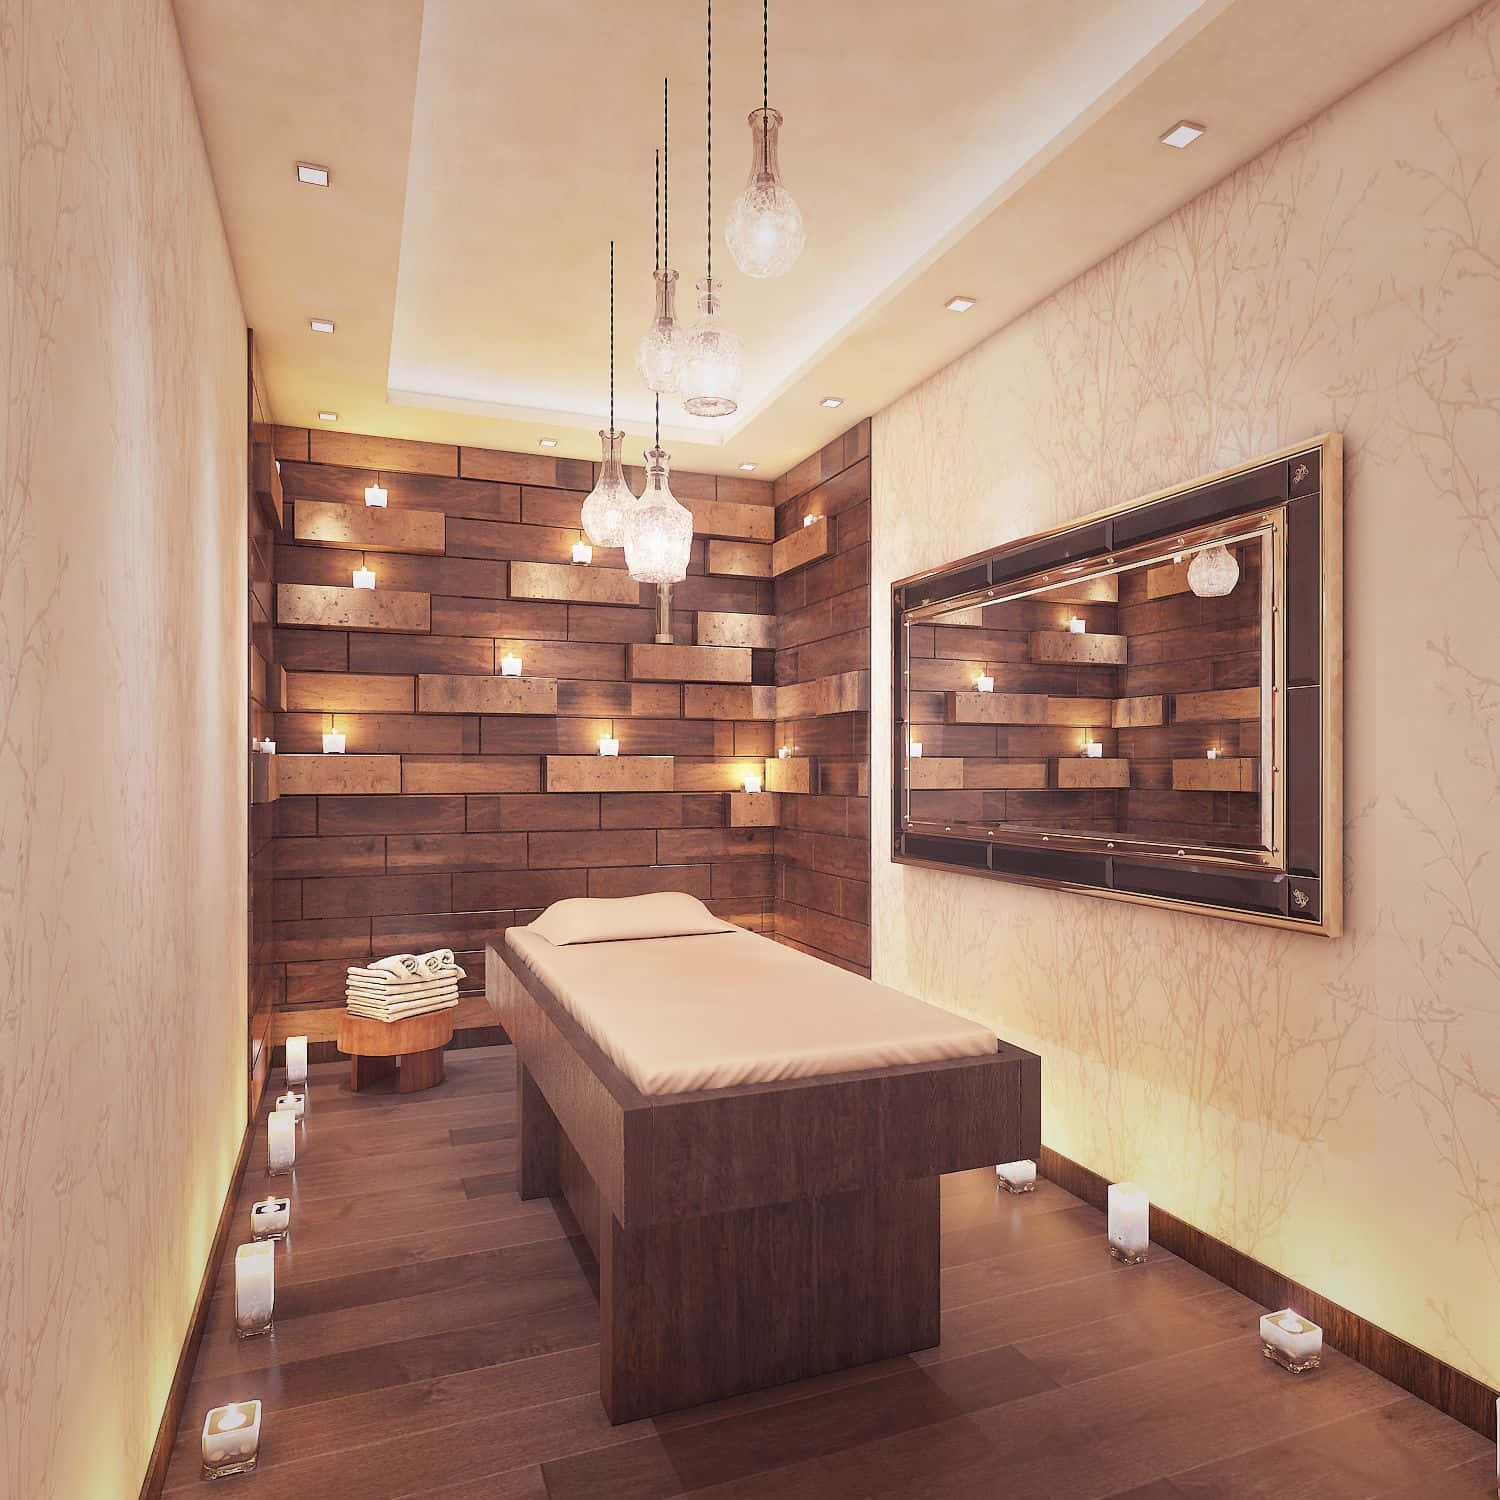 A Massage Room With Wooden Walls And A Mirror